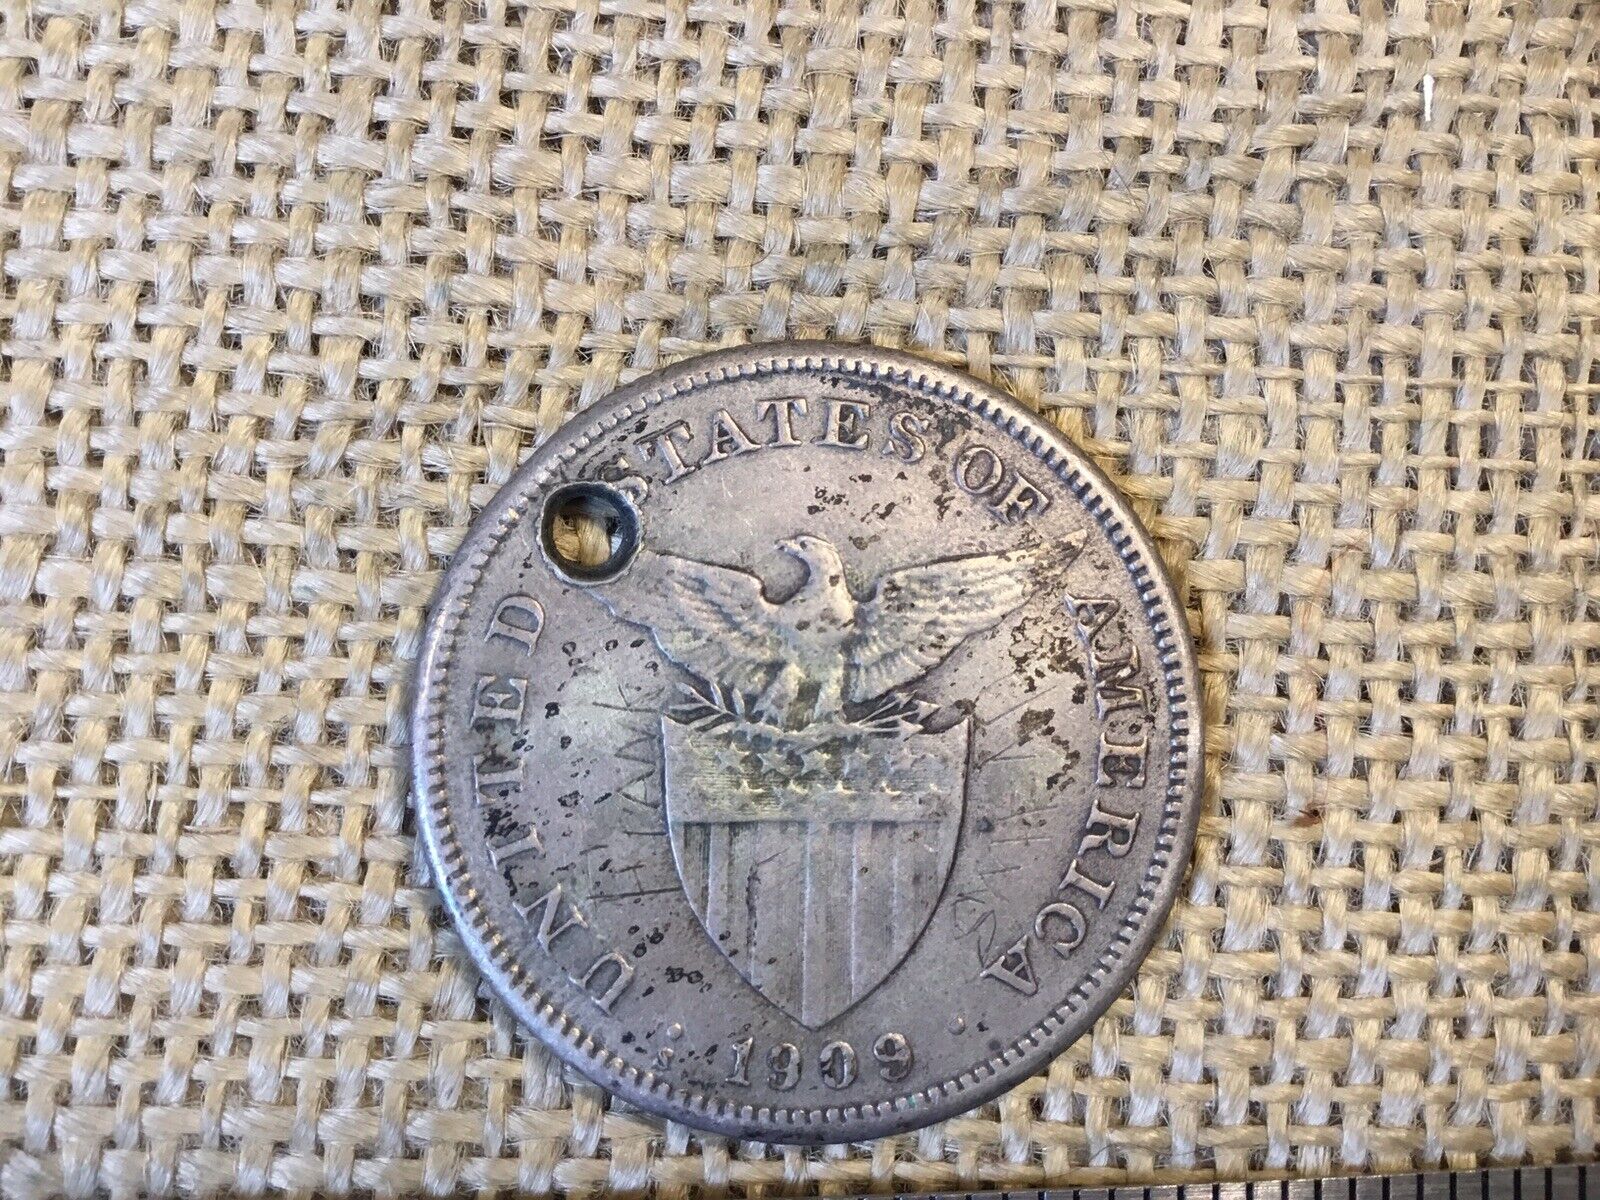 ORIGINAL US 1909 ONE PESO COIN CARRIED BY USN VETERAN WITH HIS NAME SCRATCHED ON